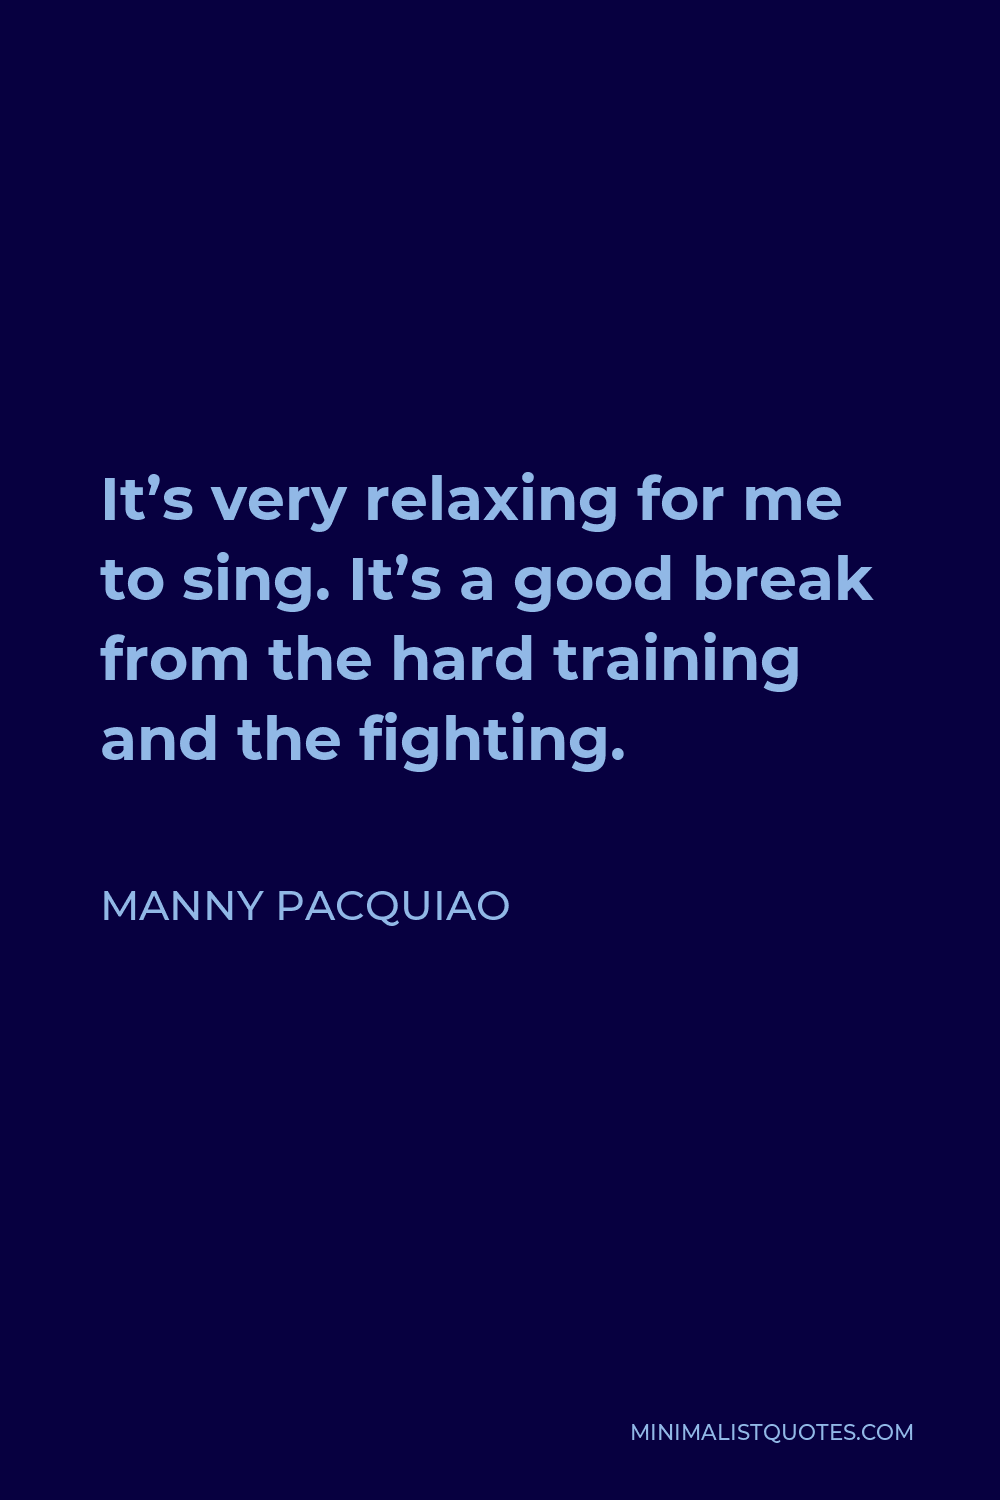 Manny Pacquiao Quote - It’s very relaxing for me to sing. It’s a good break from the hard training and the fighting.